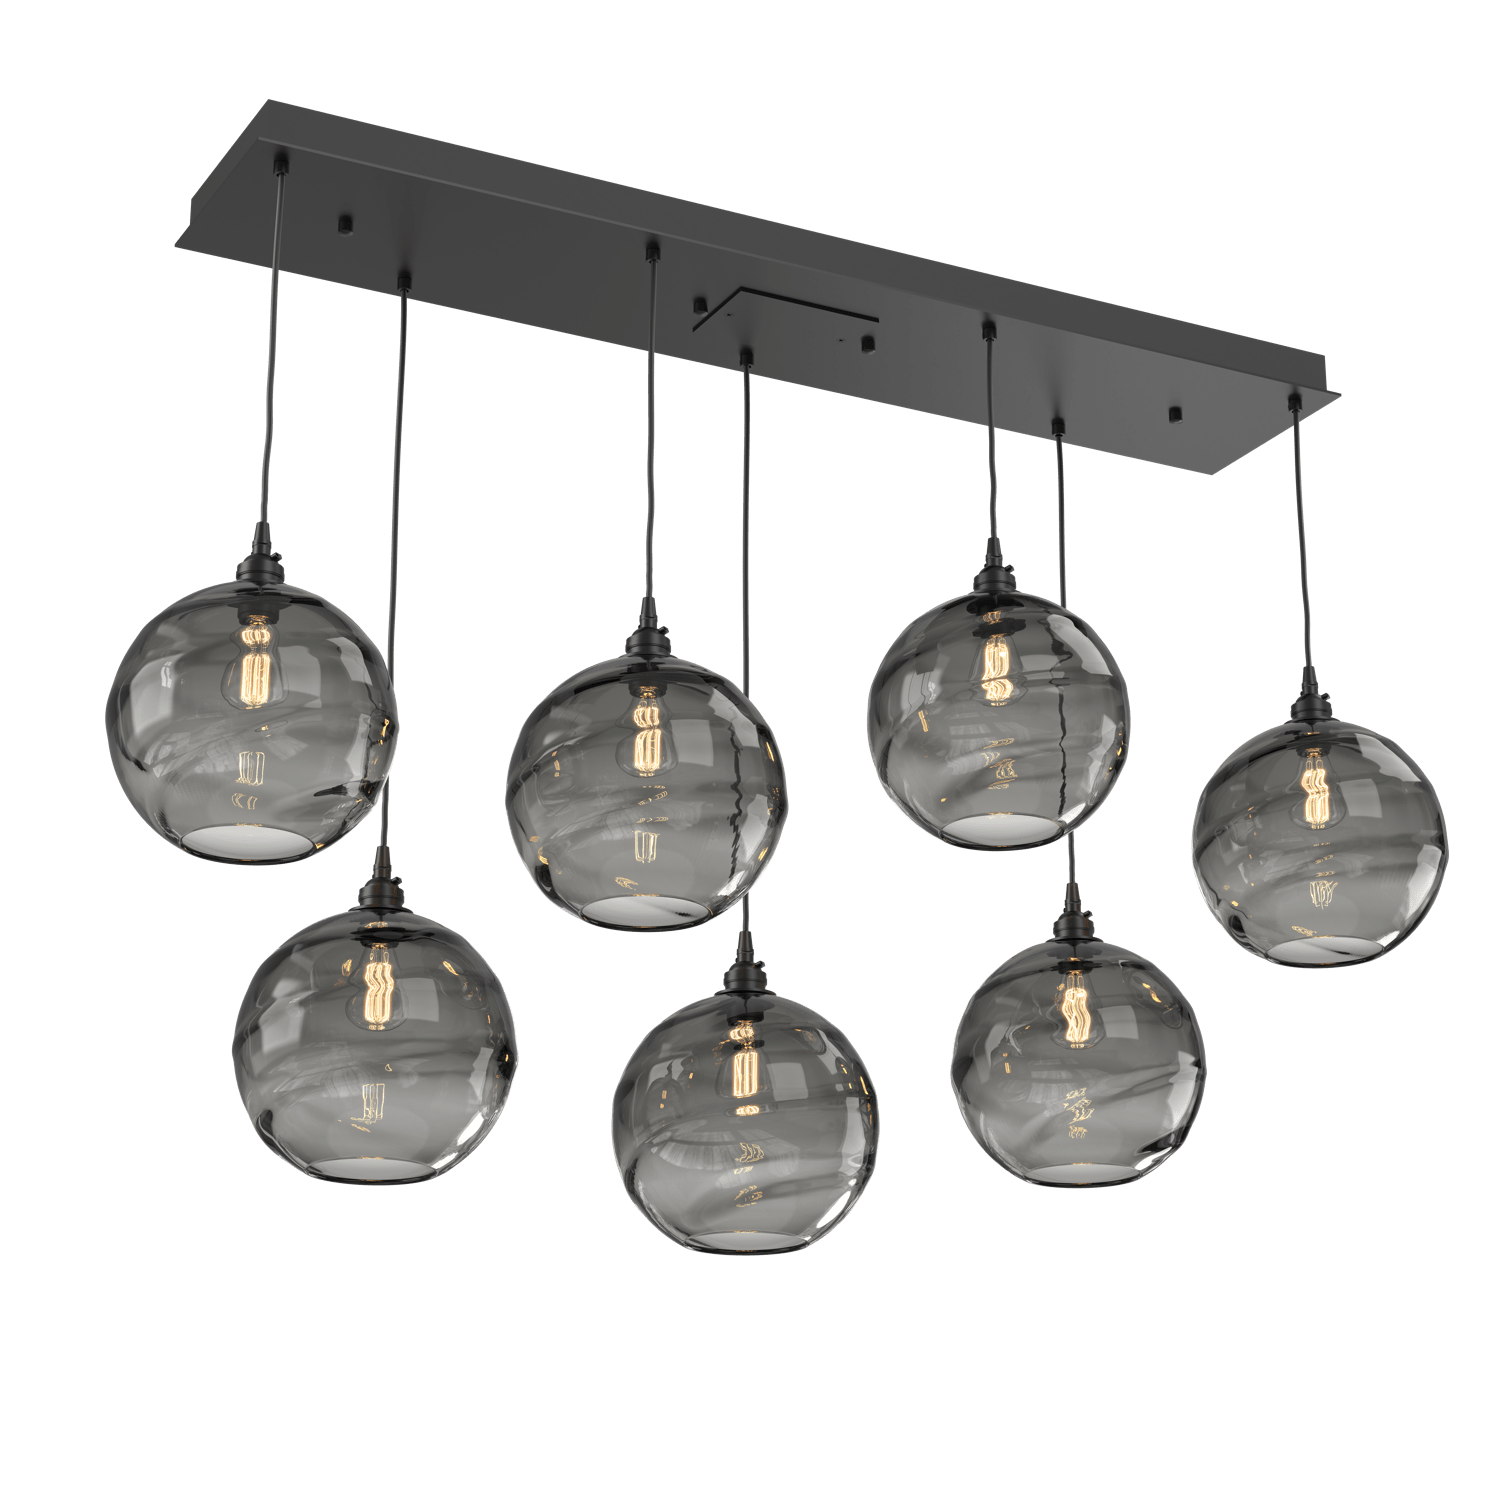 PLB0047-07-MB-OS-Hammerton-Studio-Optic-Blown-Glass-Terra-7-light-linear-pendant-chandelier-with-matte-black-finish-and-optic-smoke-blown-glass-shades-and-incandescent-lamping